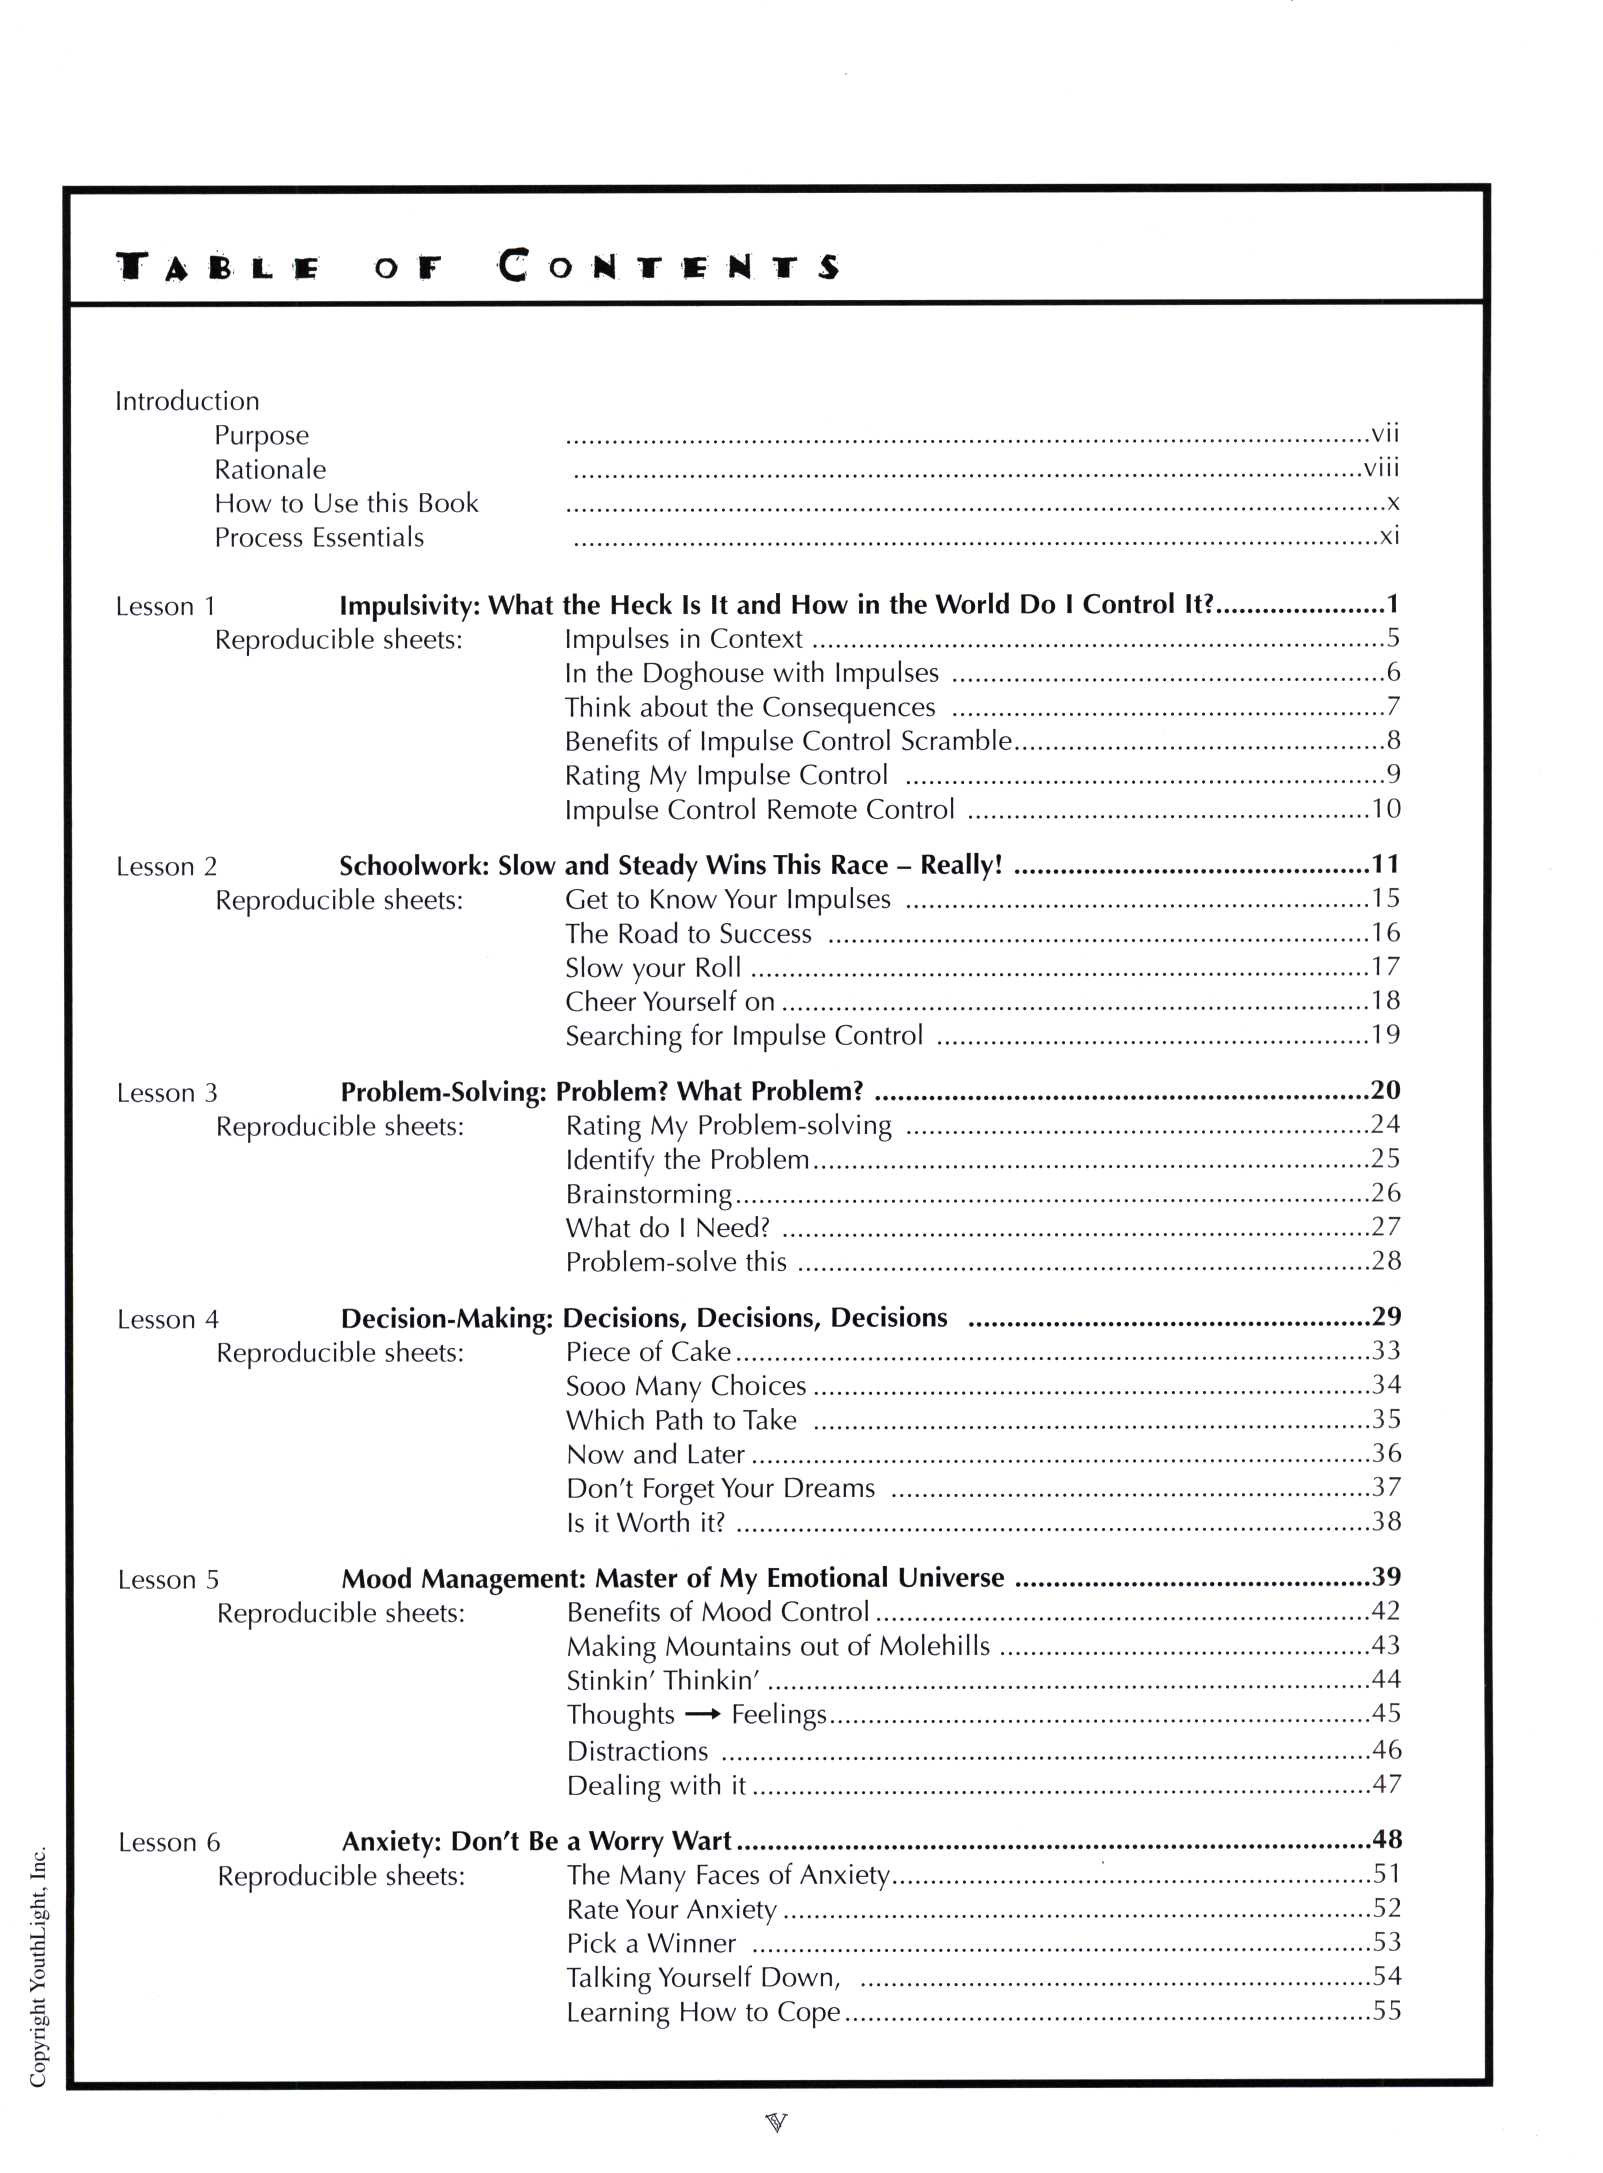 Impulse Control Worksheets Printable Impulse and Control Activity Sheets for Middle School Students